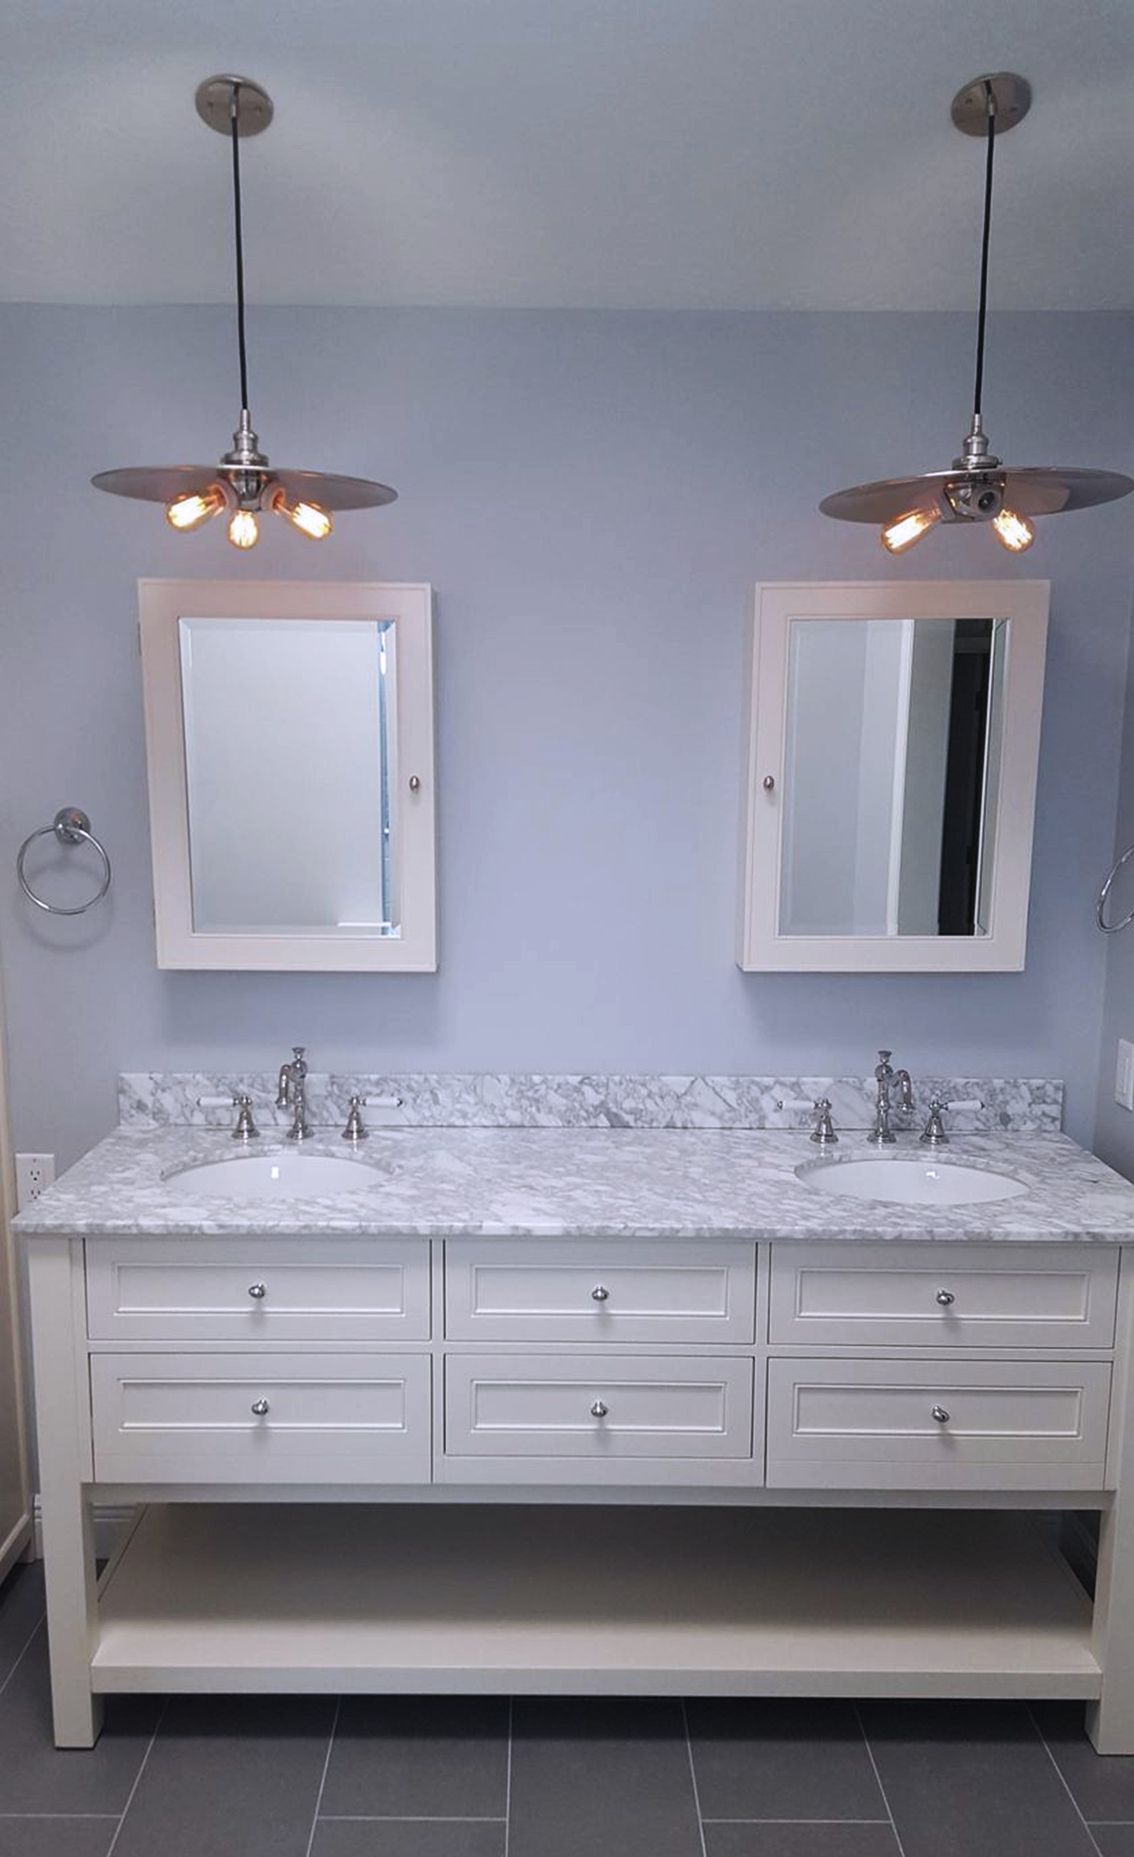 A bathroom with two sinks and two mirrors